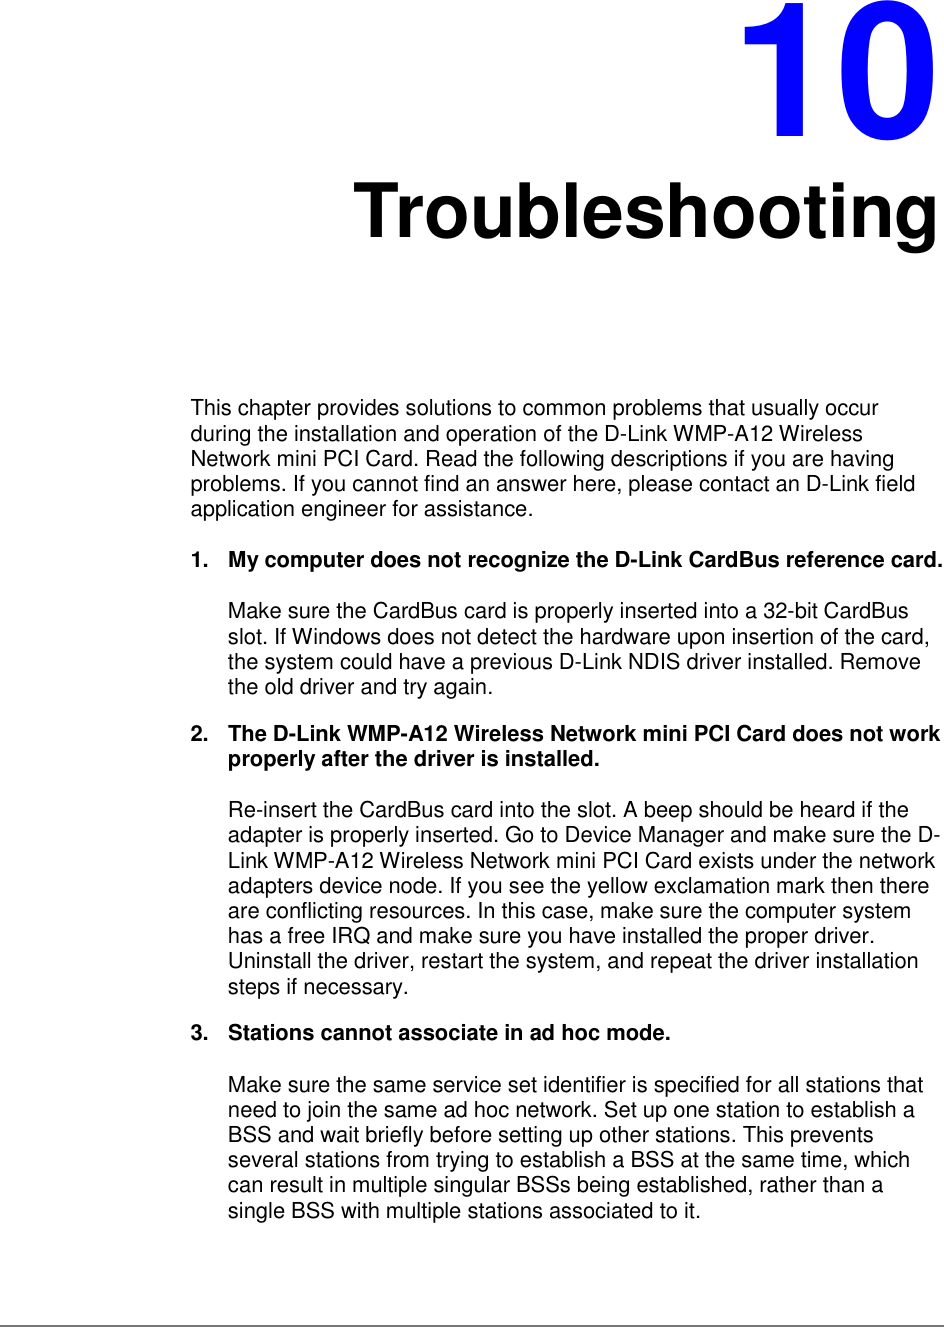 10TroubleshootingThis chapter provides solutions to common problems that usually occurduring the installation and operation of the D-Link WMP-A12 WirelessNetwork mini PCI Card. Read the following descriptions if you are havingproblems. If you cannot find an answer here, please contact an D-Link fieldapplication engineer for assistance.1.  My computer does not recognize the D-Link CardBus reference card.Make sure the CardBus card is properly inserted into a 32-bit CardBusslot. If Windows does not detect the hardware upon insertion of the card,the system could have a previous D-Link NDIS driver installed. Removethe old driver and try again.2.  The D-Link WMP-A12 Wireless Network mini PCI Card does not workproperly after the driver is installed.Re-insert the CardBus card into the slot. A beep should be heard if theadapter is properly inserted. Go to Device Manager and make sure the D-Link WMP-A12 Wireless Network mini PCI Card exists under the networkadapters device node. If you see the yellow exclamation mark then thereare conflicting resources. In this case, make sure the computer systemhas a free IRQ and make sure you have installed the proper driver.Uninstall the driver, restart the system, and repeat the driver installationsteps if necessary.3.  Stations cannot associate in ad hoc mode.Make sure the same service set identifier is specified for all stations thatneed to join the same ad hoc network. Set up one station to establish aBSS and wait briefly before setting up other stations. This preventsseveral stations from trying to establish a BSS at the same time, whichcan result in multiple singular BSSs being established, rather than asingle BSS with multiple stations associated to it.